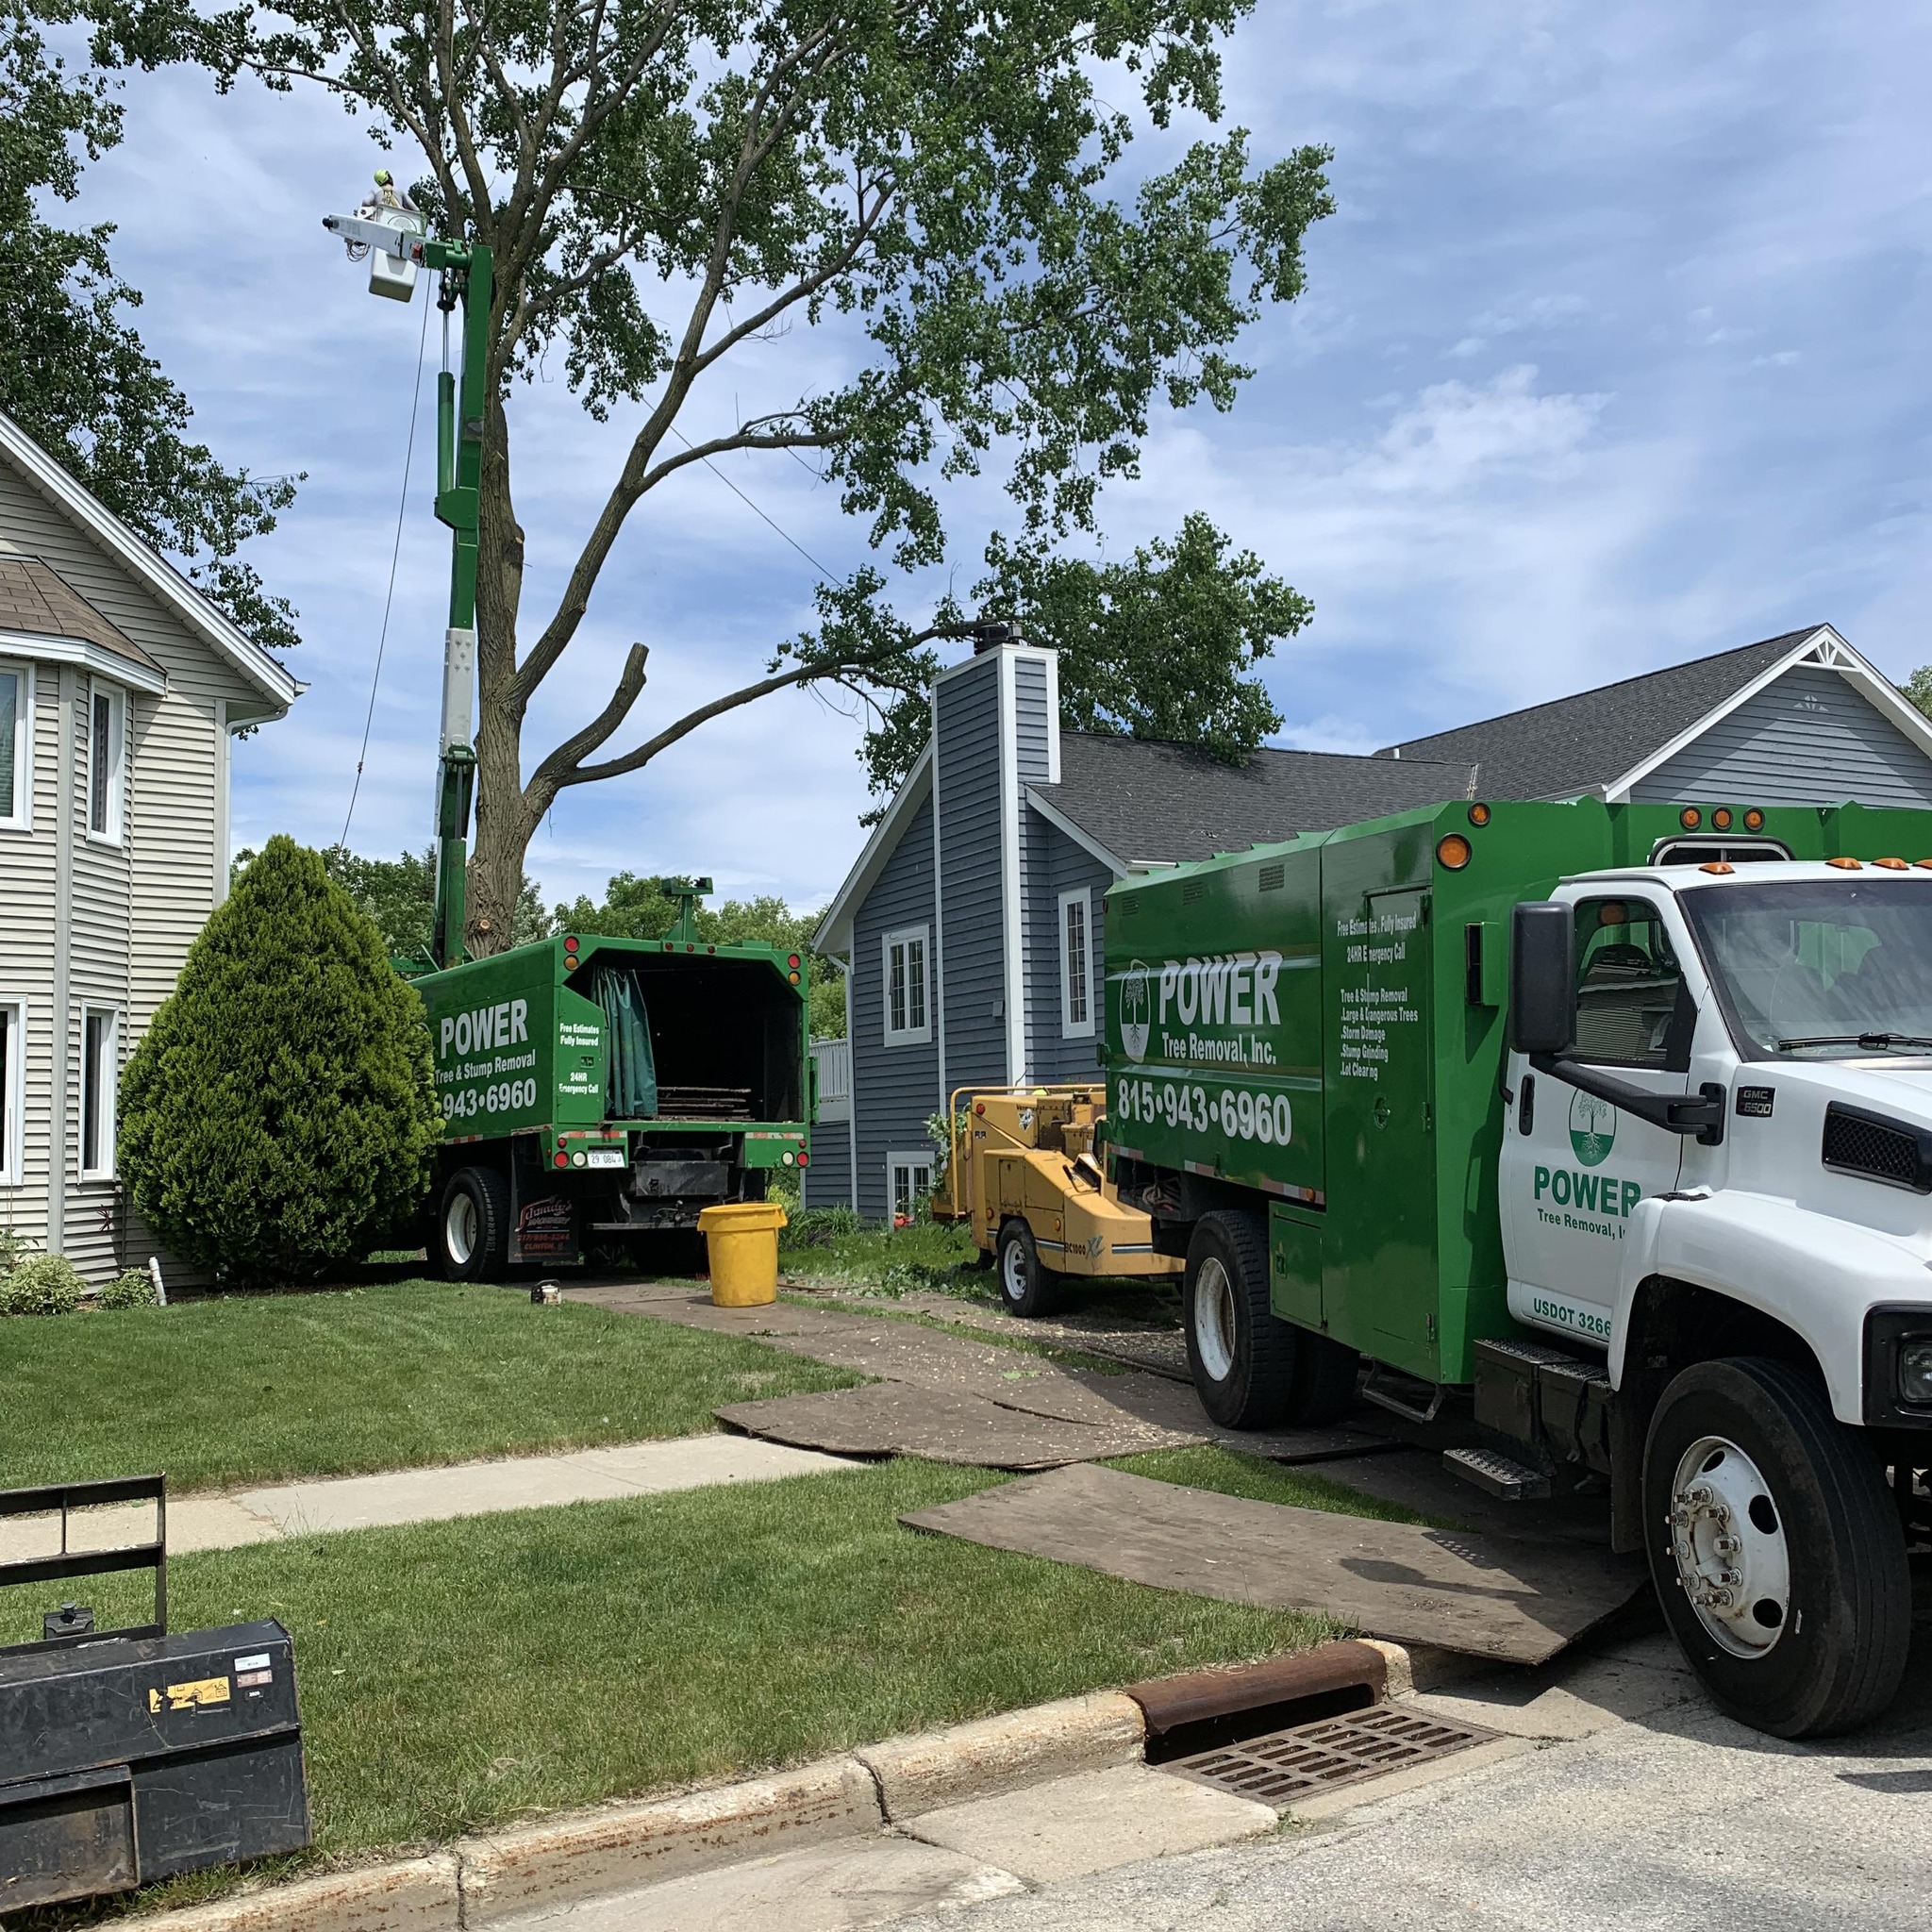 Power Tree Removal & Landscaping 1442 S Division St, Harvard Illinois 60033